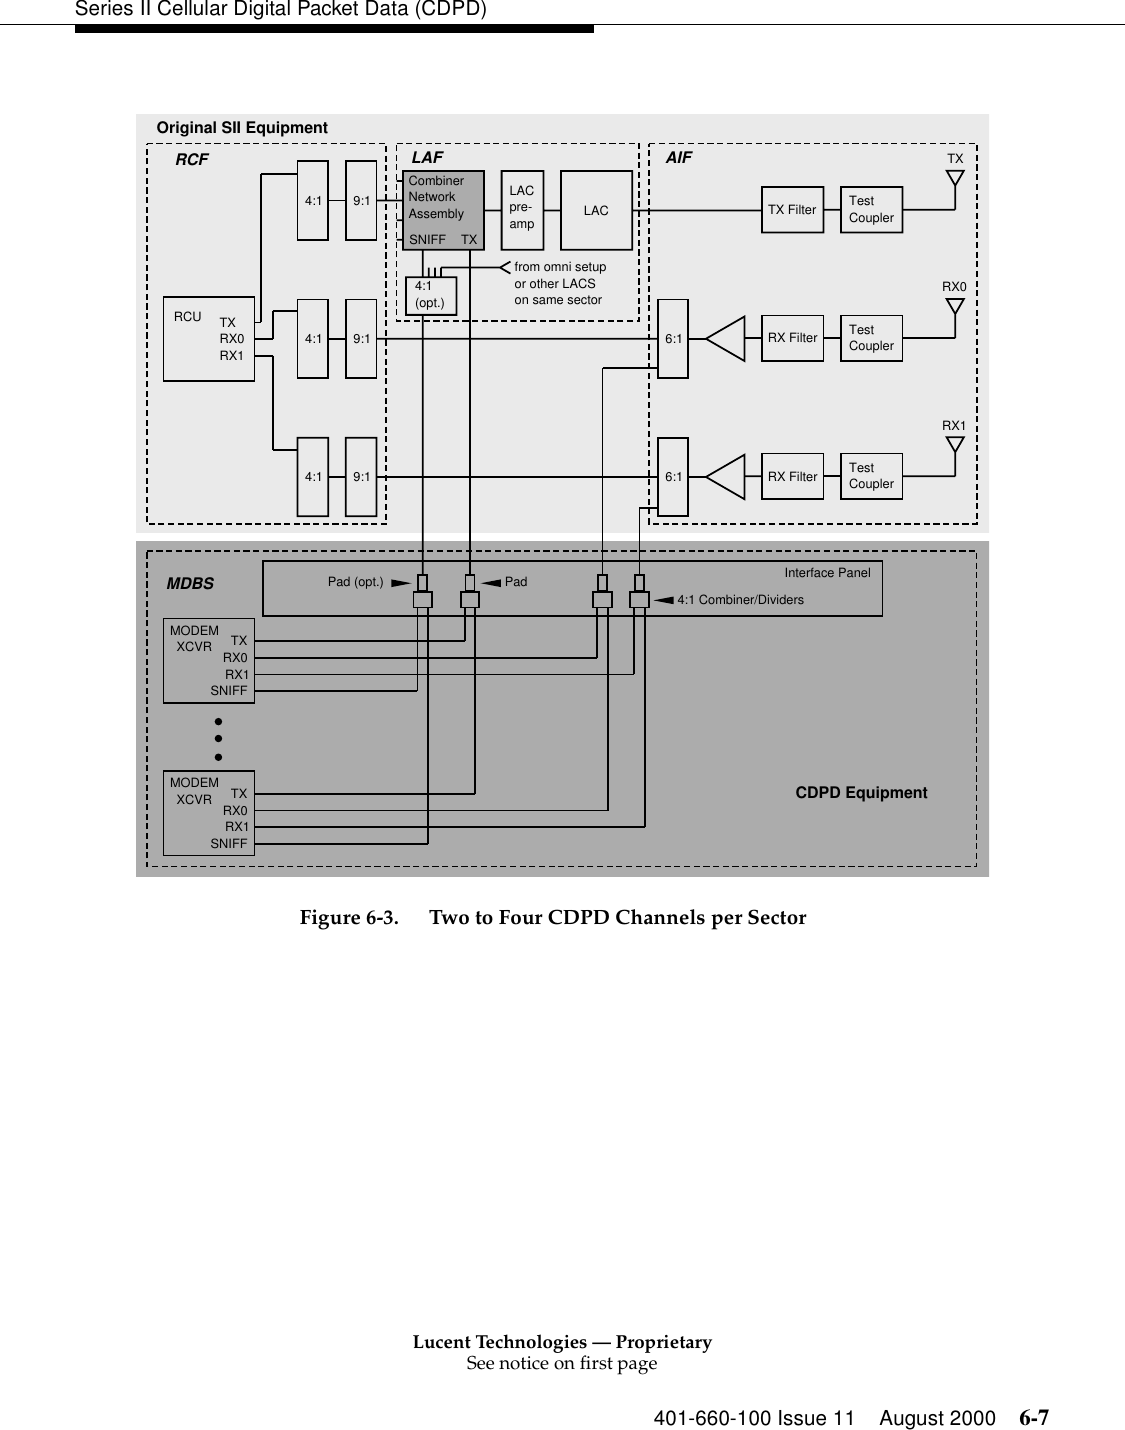 Lucent Technologies — ProprietarySee notice on first page401-660-100 Issue 11 August 2000 6-7Series II Cellular Digital Packet Data (CDPD)Figure 6-3. Two to Four CDPD Channels per Sector4:1 9:1LAFCombinerNetworkAssemblySNIFF TXLACpre-amp LACfrom omni setupor other LACSon same sector4:1(opt.)TX Filter TestCouplerTX6:1 RX Filter TestCoupler4:1 9:14:1 9:1 6:1 RX Filter TestCouplerRX0RX1Interface PanelMODEMXCVR TXRX0RX1SNIFFTXRX0RX1RCURCFMDBSOriginal SII EquipmentCDPD EquipmentAIFPad4:1 Combiner/DividersPad (opt.)MODEMXCVR TXRX0RX1SNIFF